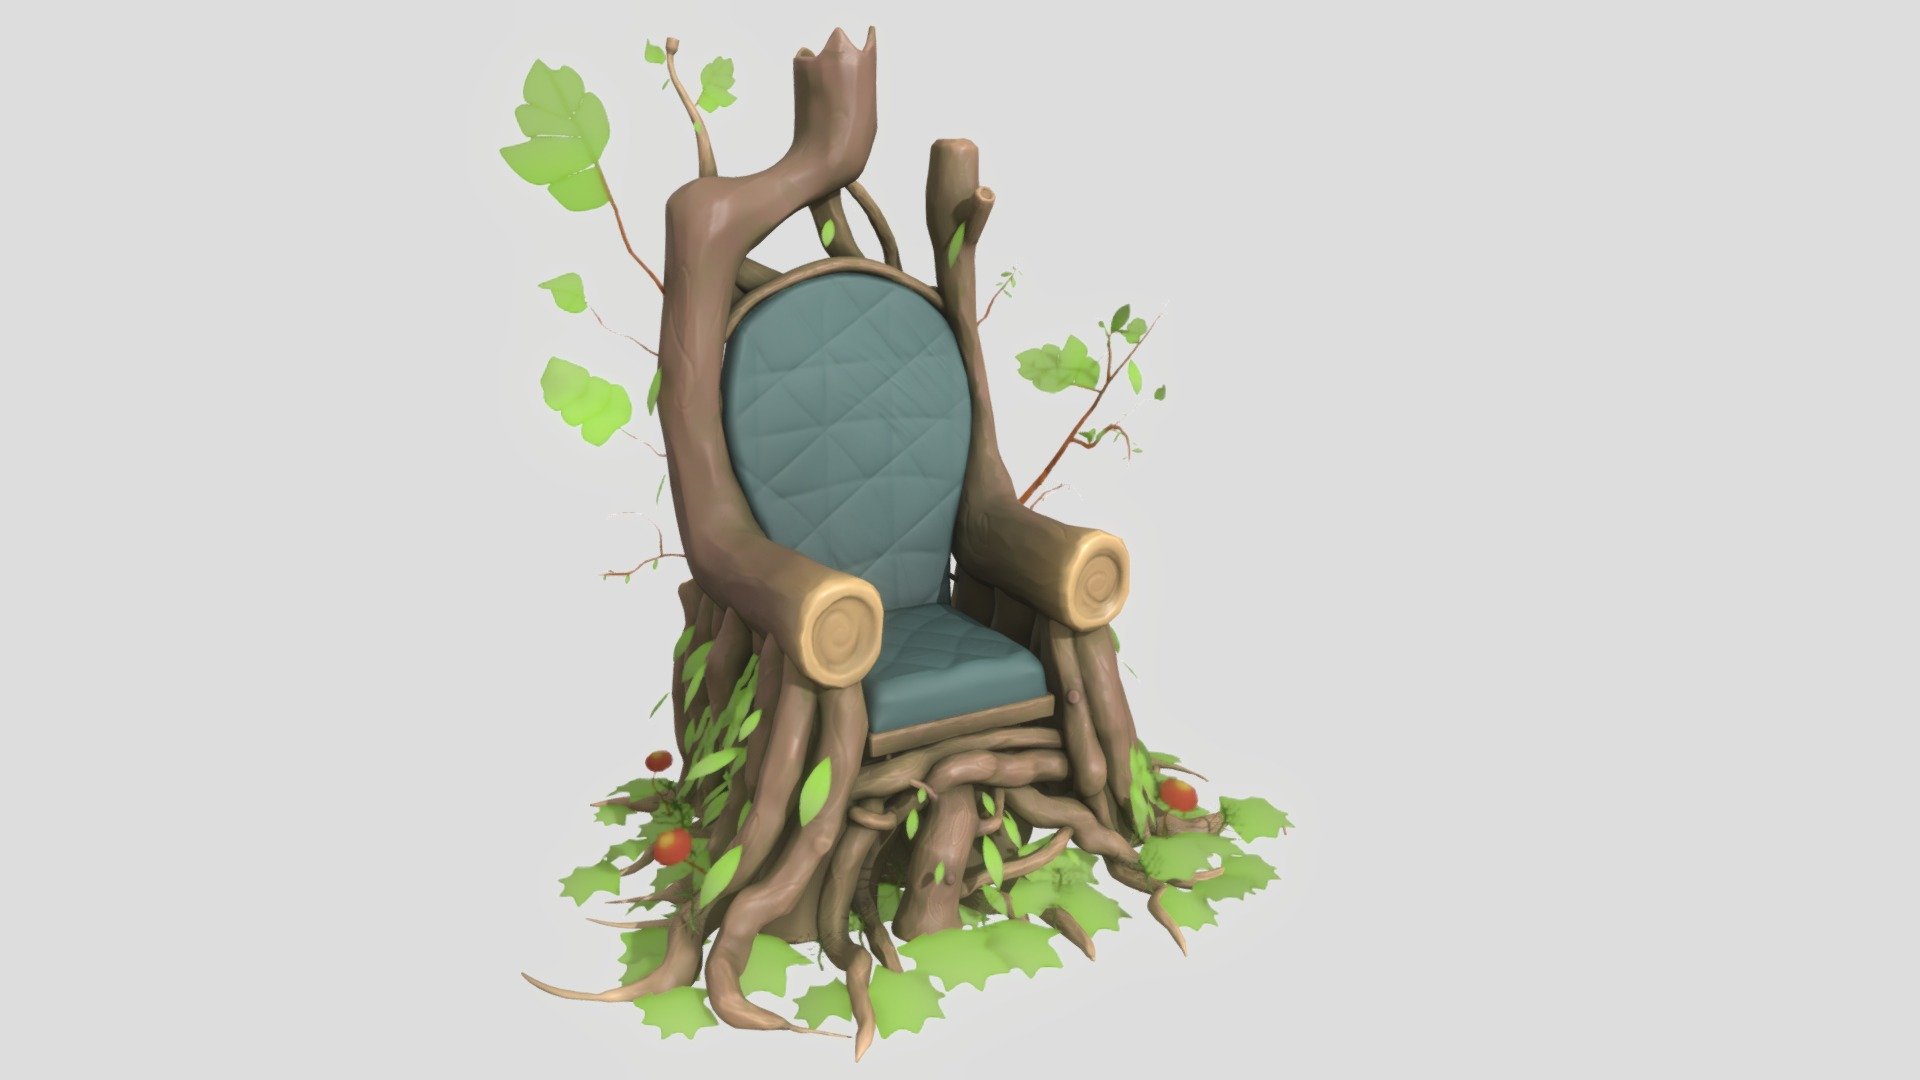 A 3D object that i made for a game that i am helping to make as a work study thing at school.

Here is a link to the game: Henegames Mushroom Adventures - Stylized Nature Throne - 3D model by Nkosa 3d model